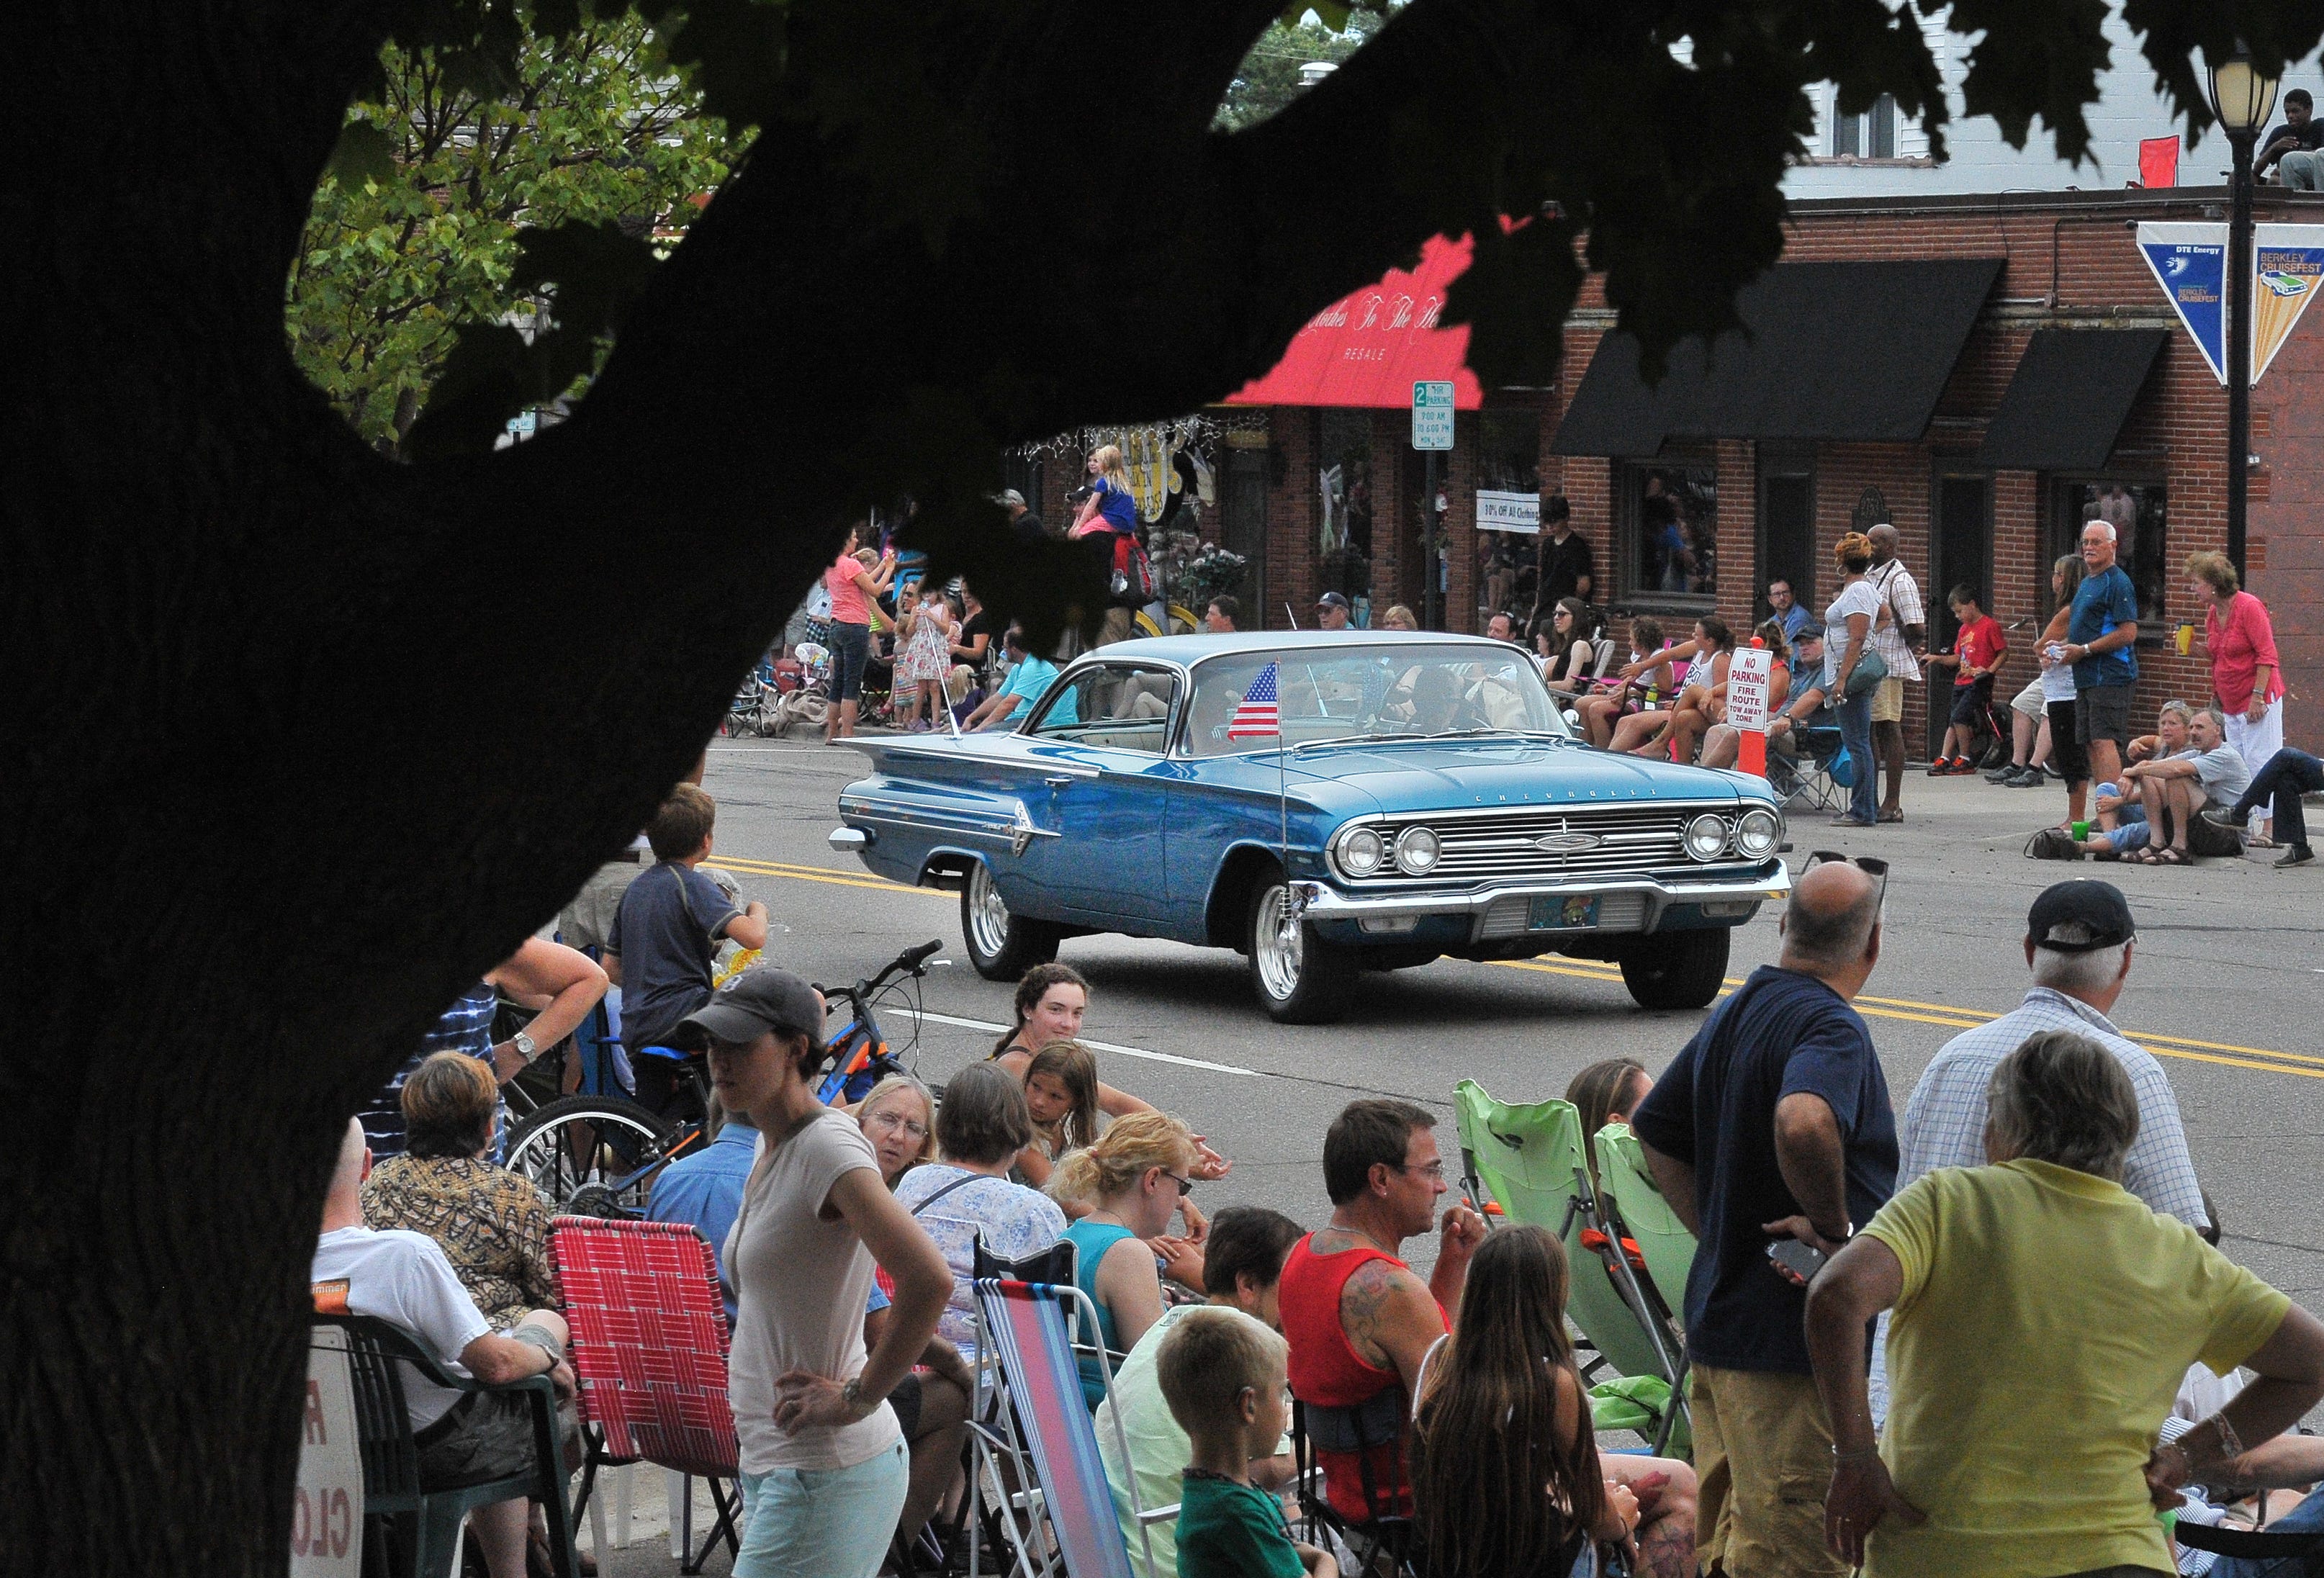 A 1960 Impala makes its way down 12 Mile for the Berkley Cruisefest parade, Aug. 14, 2015.